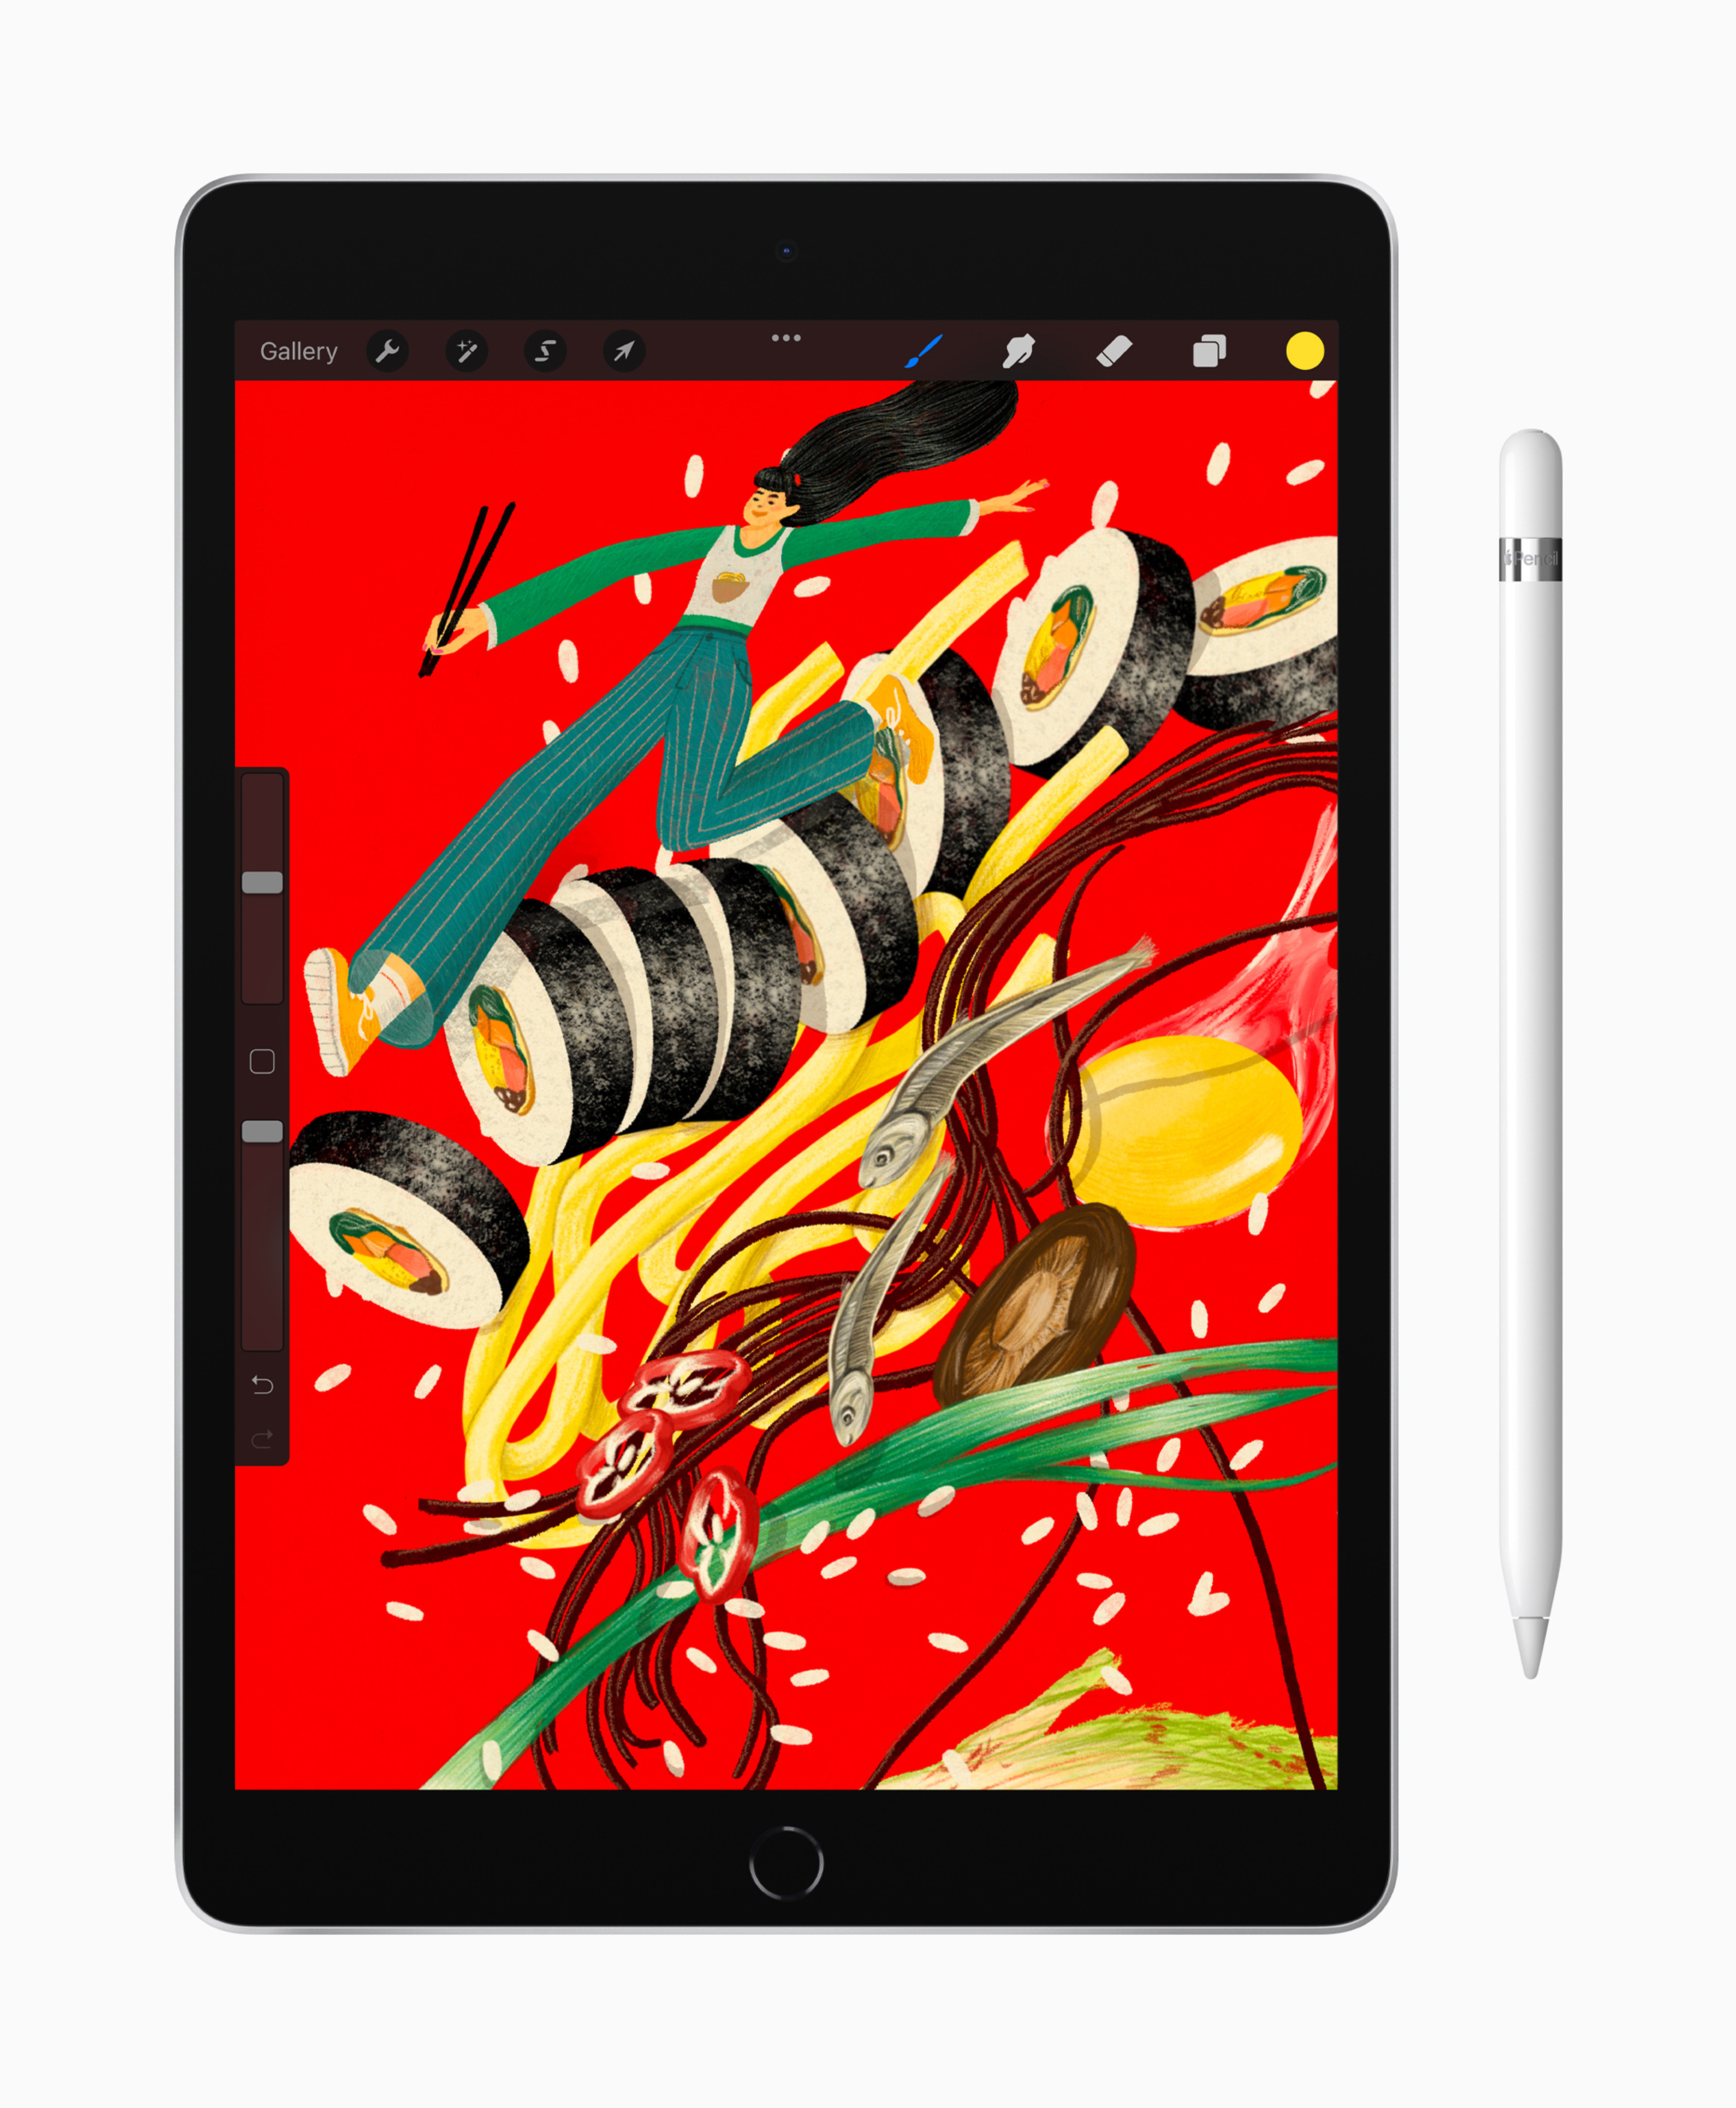 Apple's most popular iPad delivers even more performance and